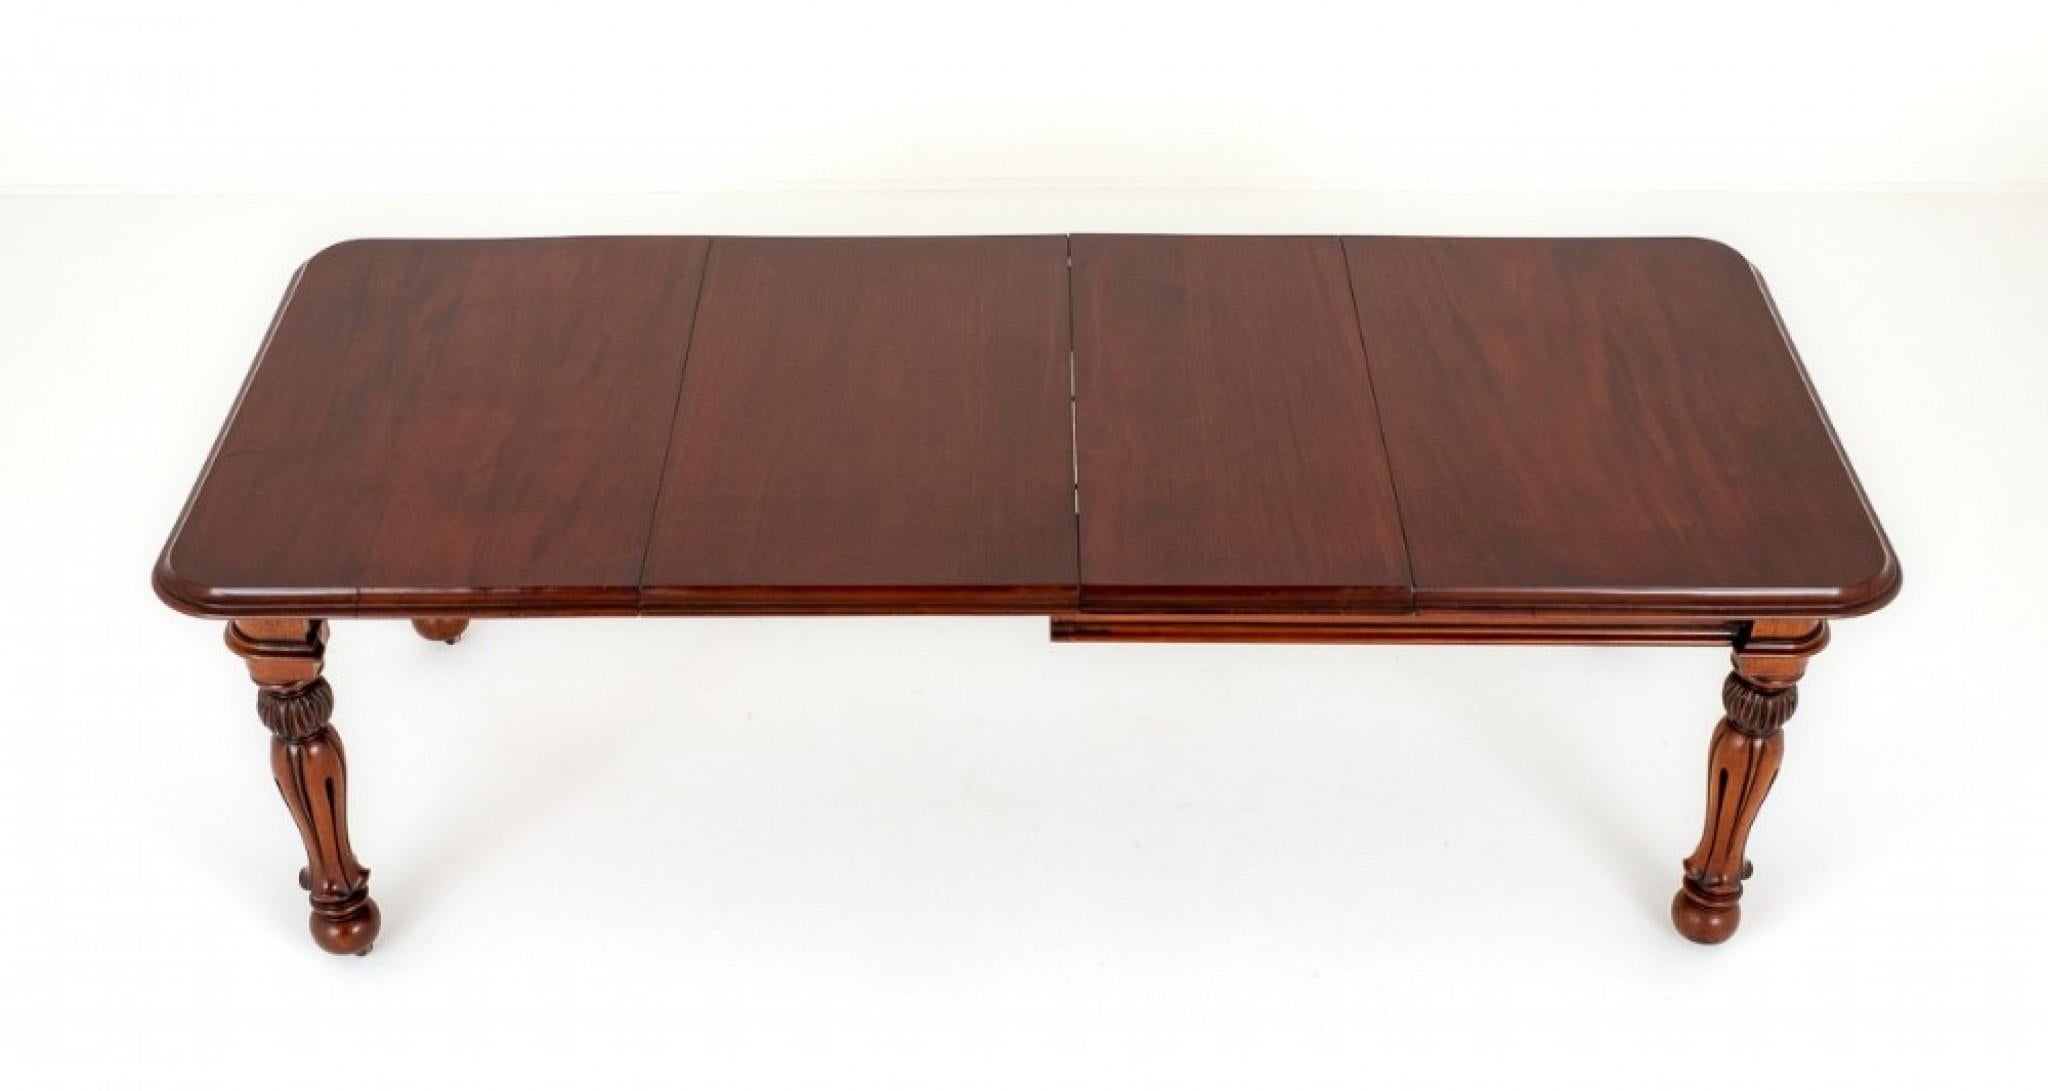 Victorian Dining Table Extending 2 Leaf Mahogany 1860 For Sale 2